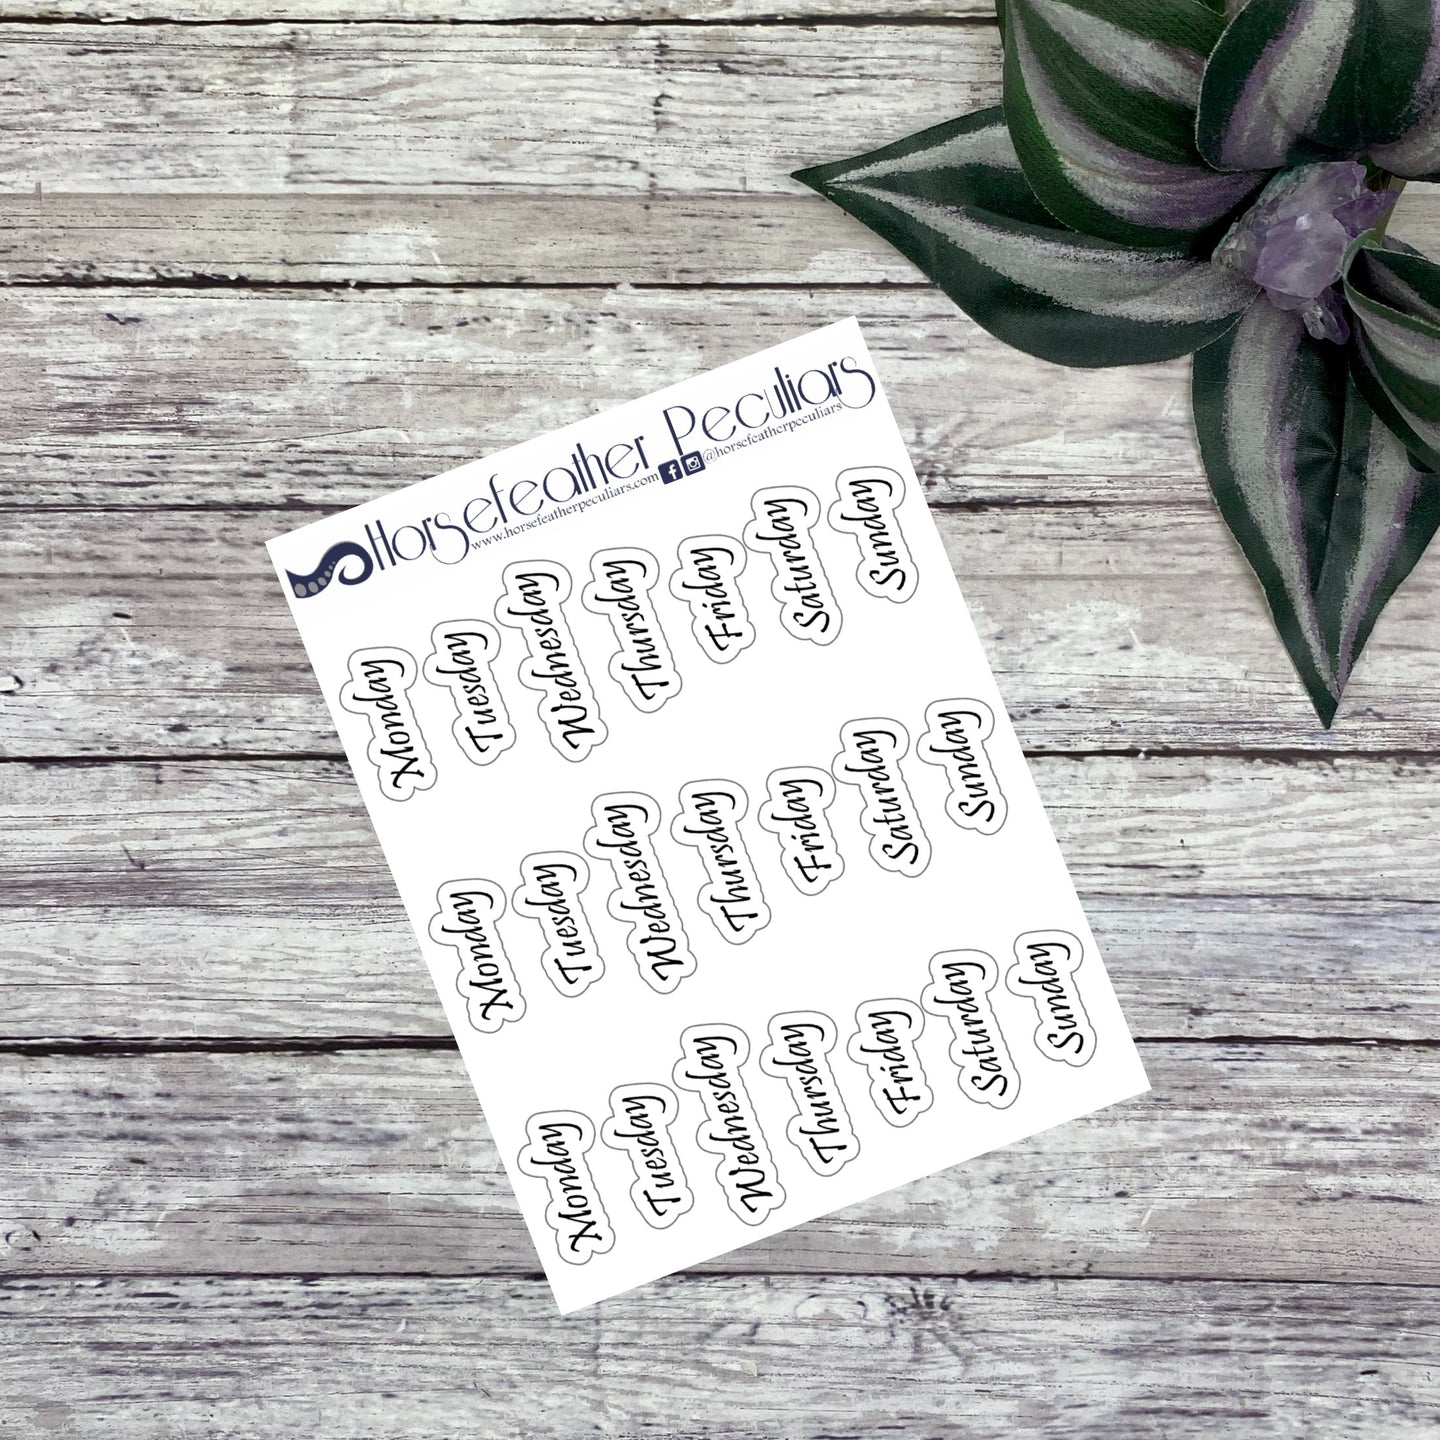 Days of the Week Planner Stickers